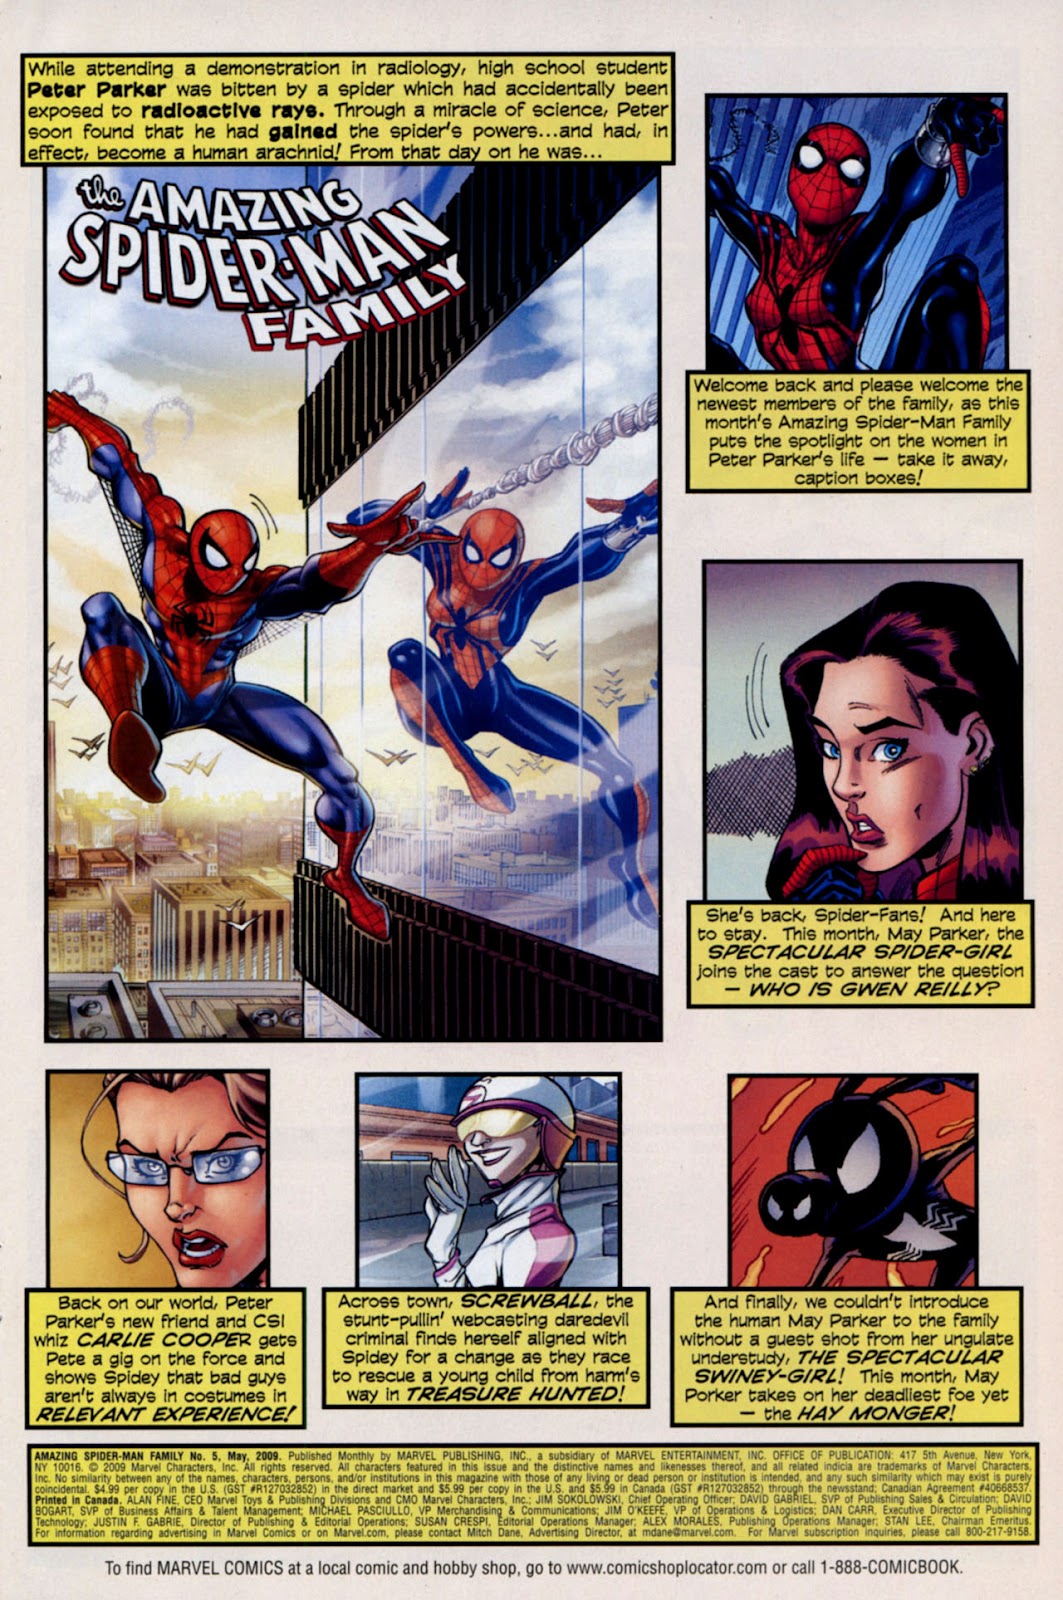 The Amazing Spider Man Family 005 | Read The Amazing Spider Man Family 005  comic online in high quality. Read Full Comic online for free - Read comics  online in high quality .|viewcomiconline.com